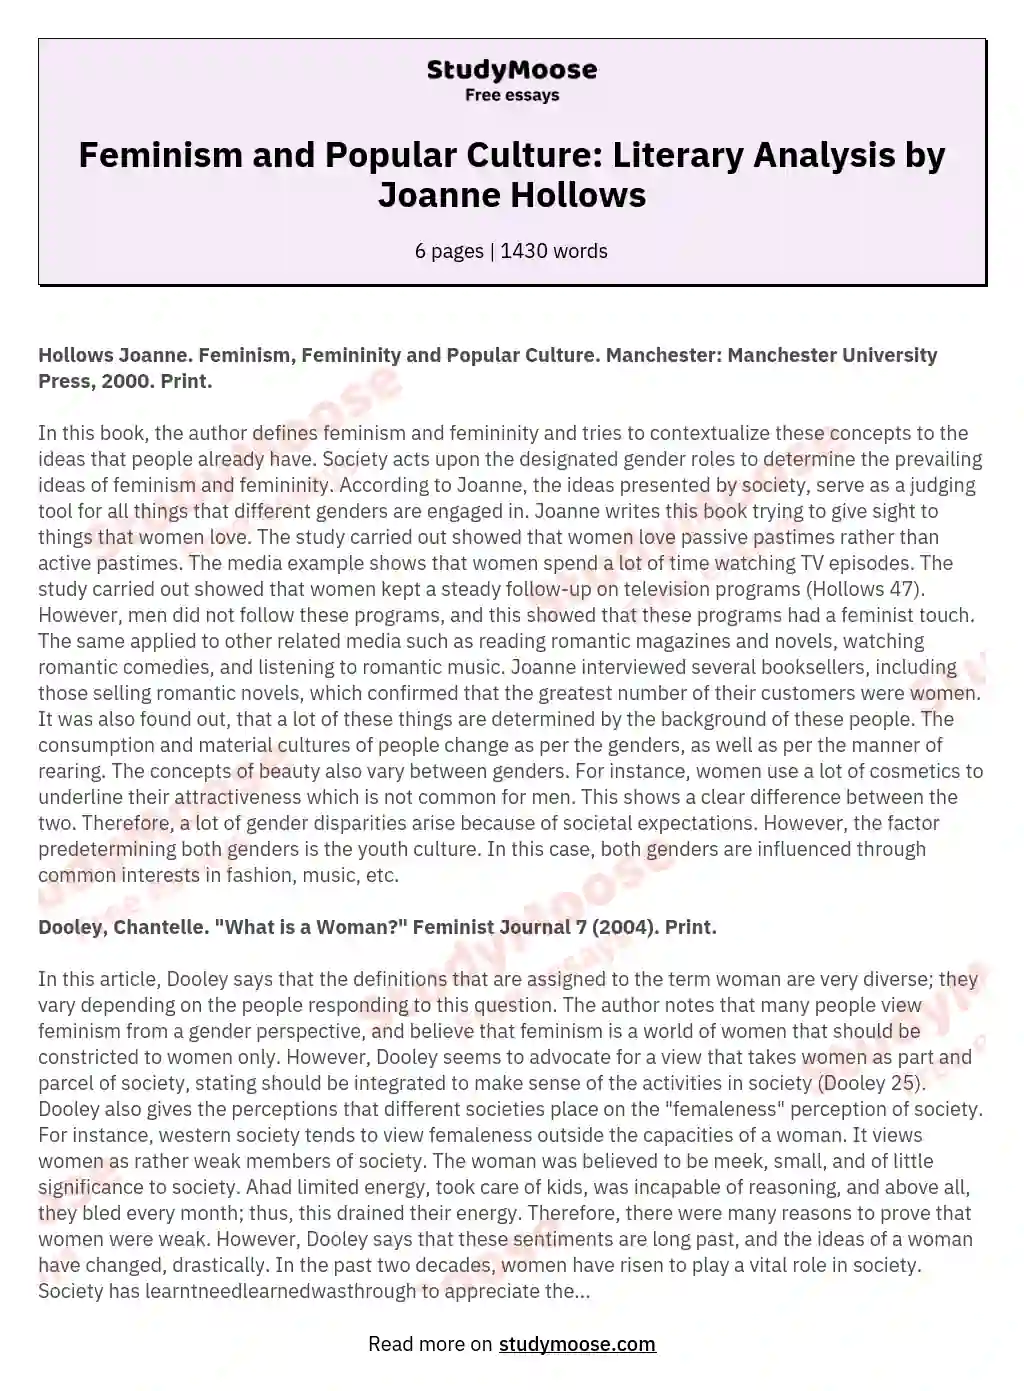 Feminism and Popular Culture: Literary Analysis by Joanne Hollows essay